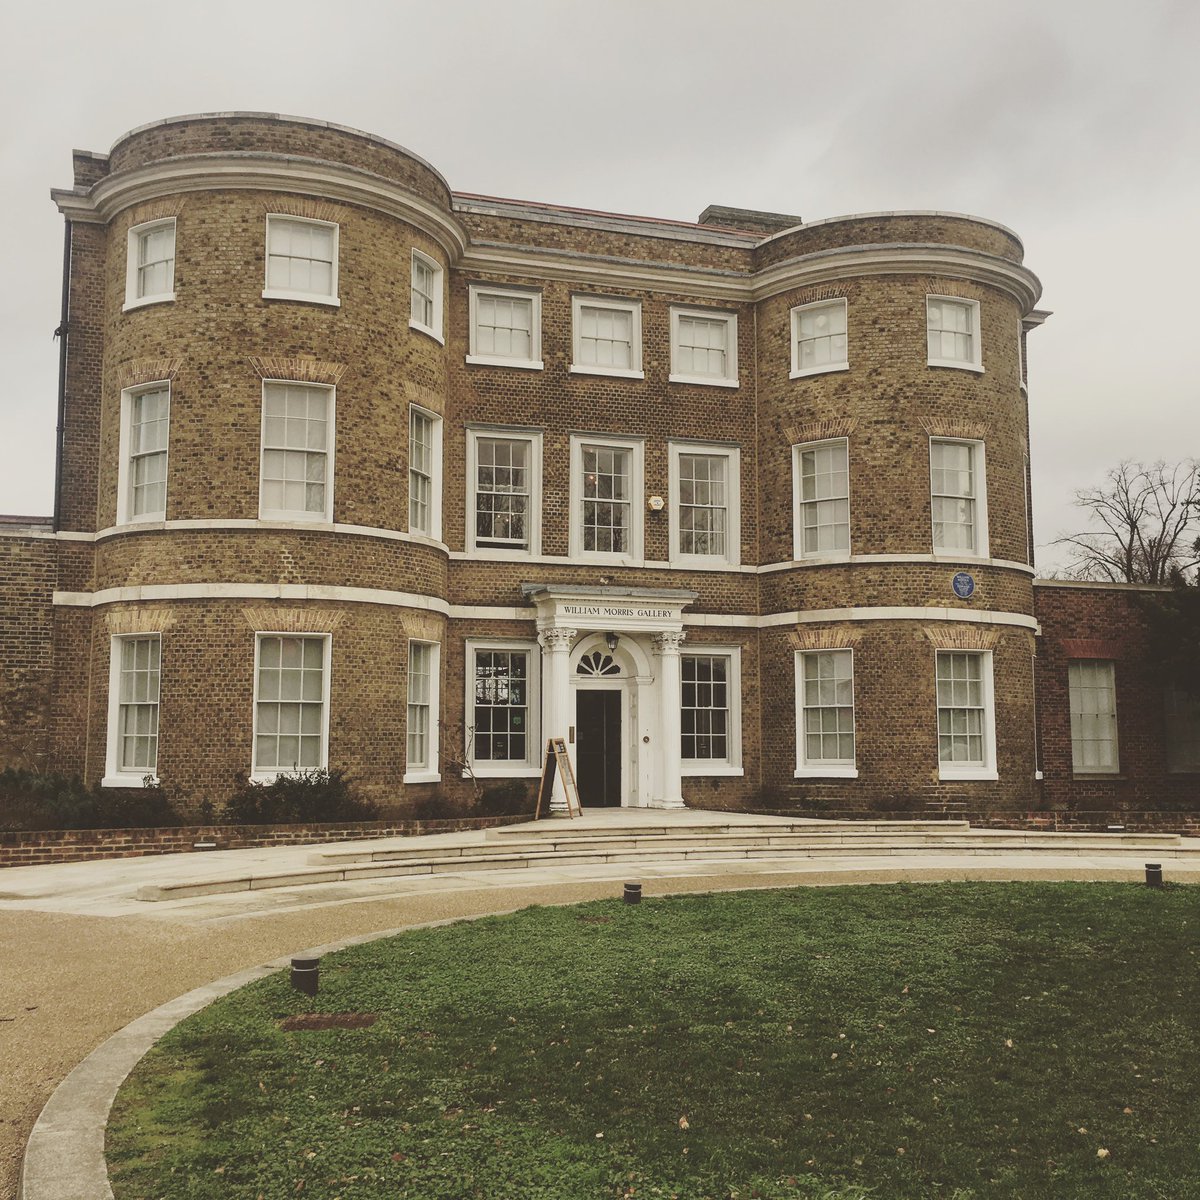  @WMGallery another beautiful building I visited for the first time fairly recently in  #Walthamstow it tells the story of the arts and crafts movement and William Morris. Refurbished in 2012 during closure exhibitions were show cased.  @TwoTemplePlace  #MuseumsUnlocked